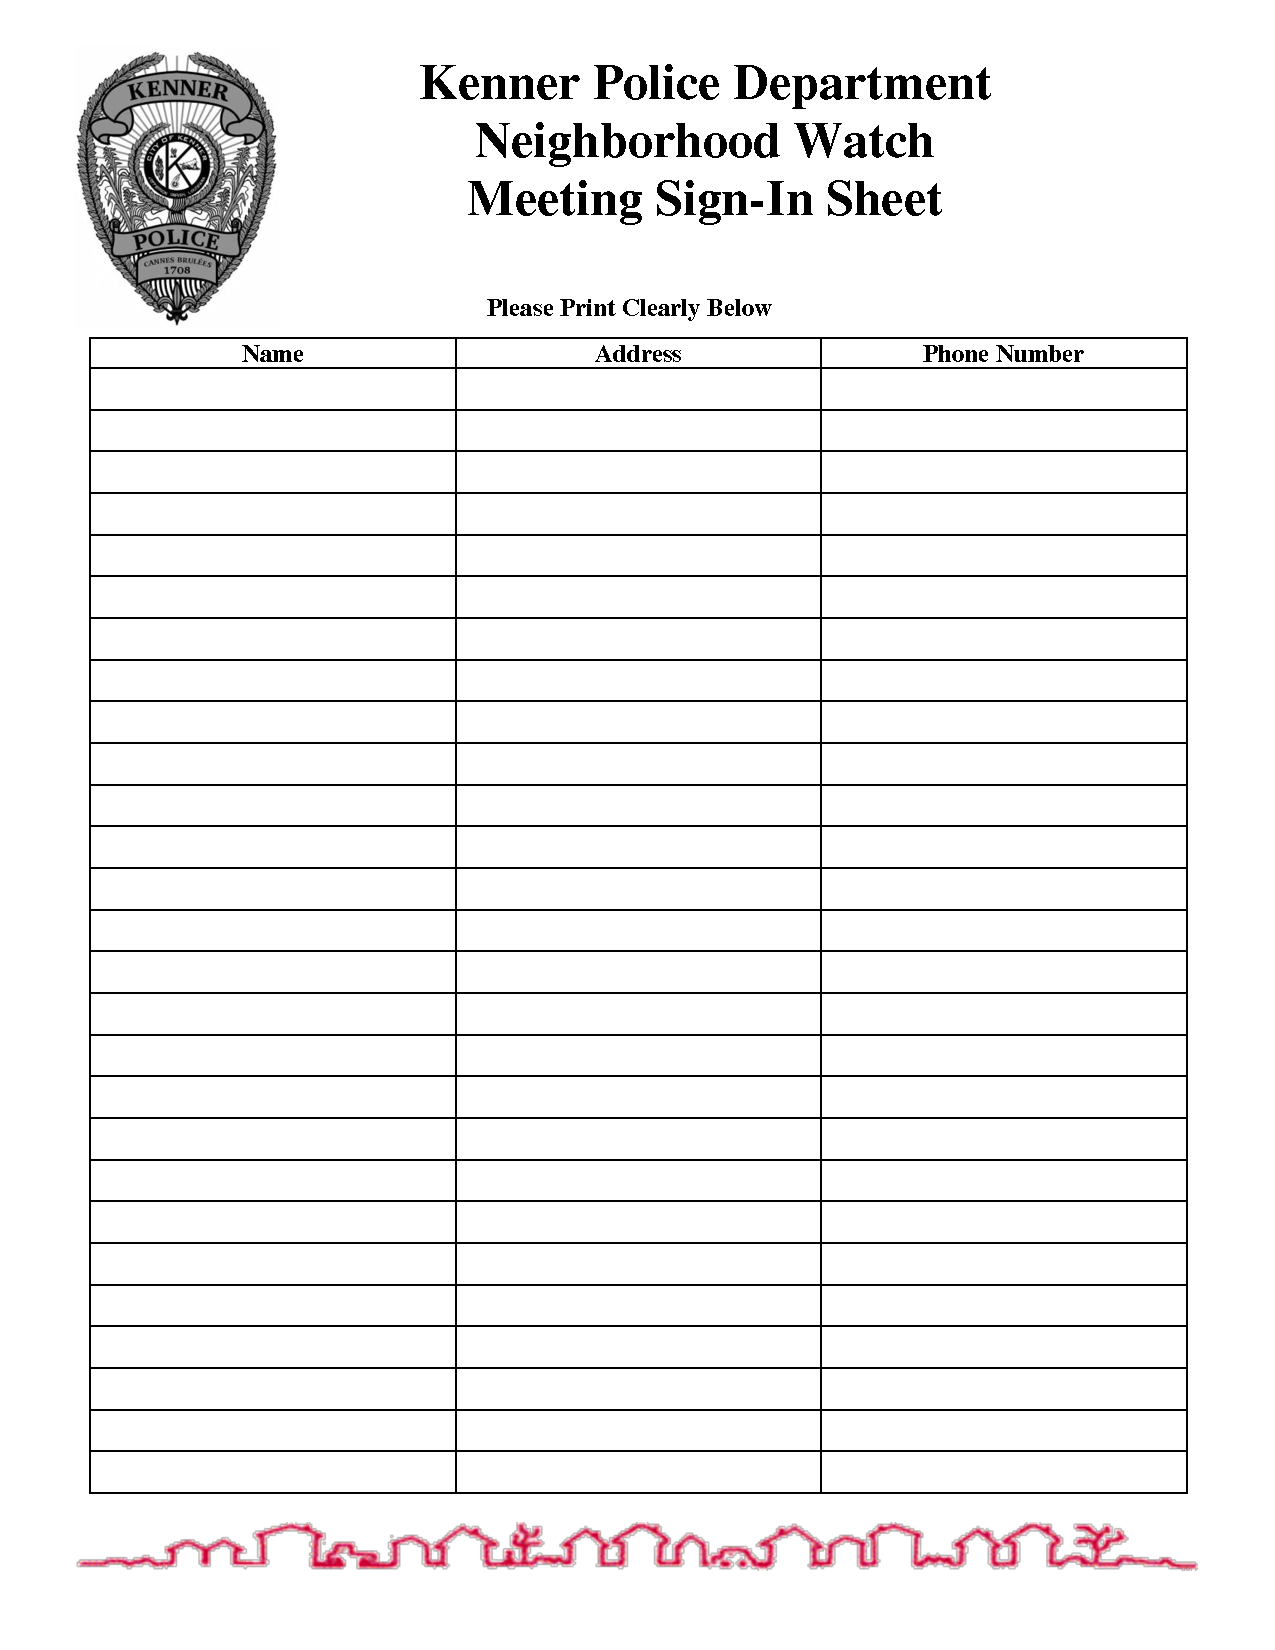 board-meeting-sign-in-sheet-templates-at-allbusinesstemplates